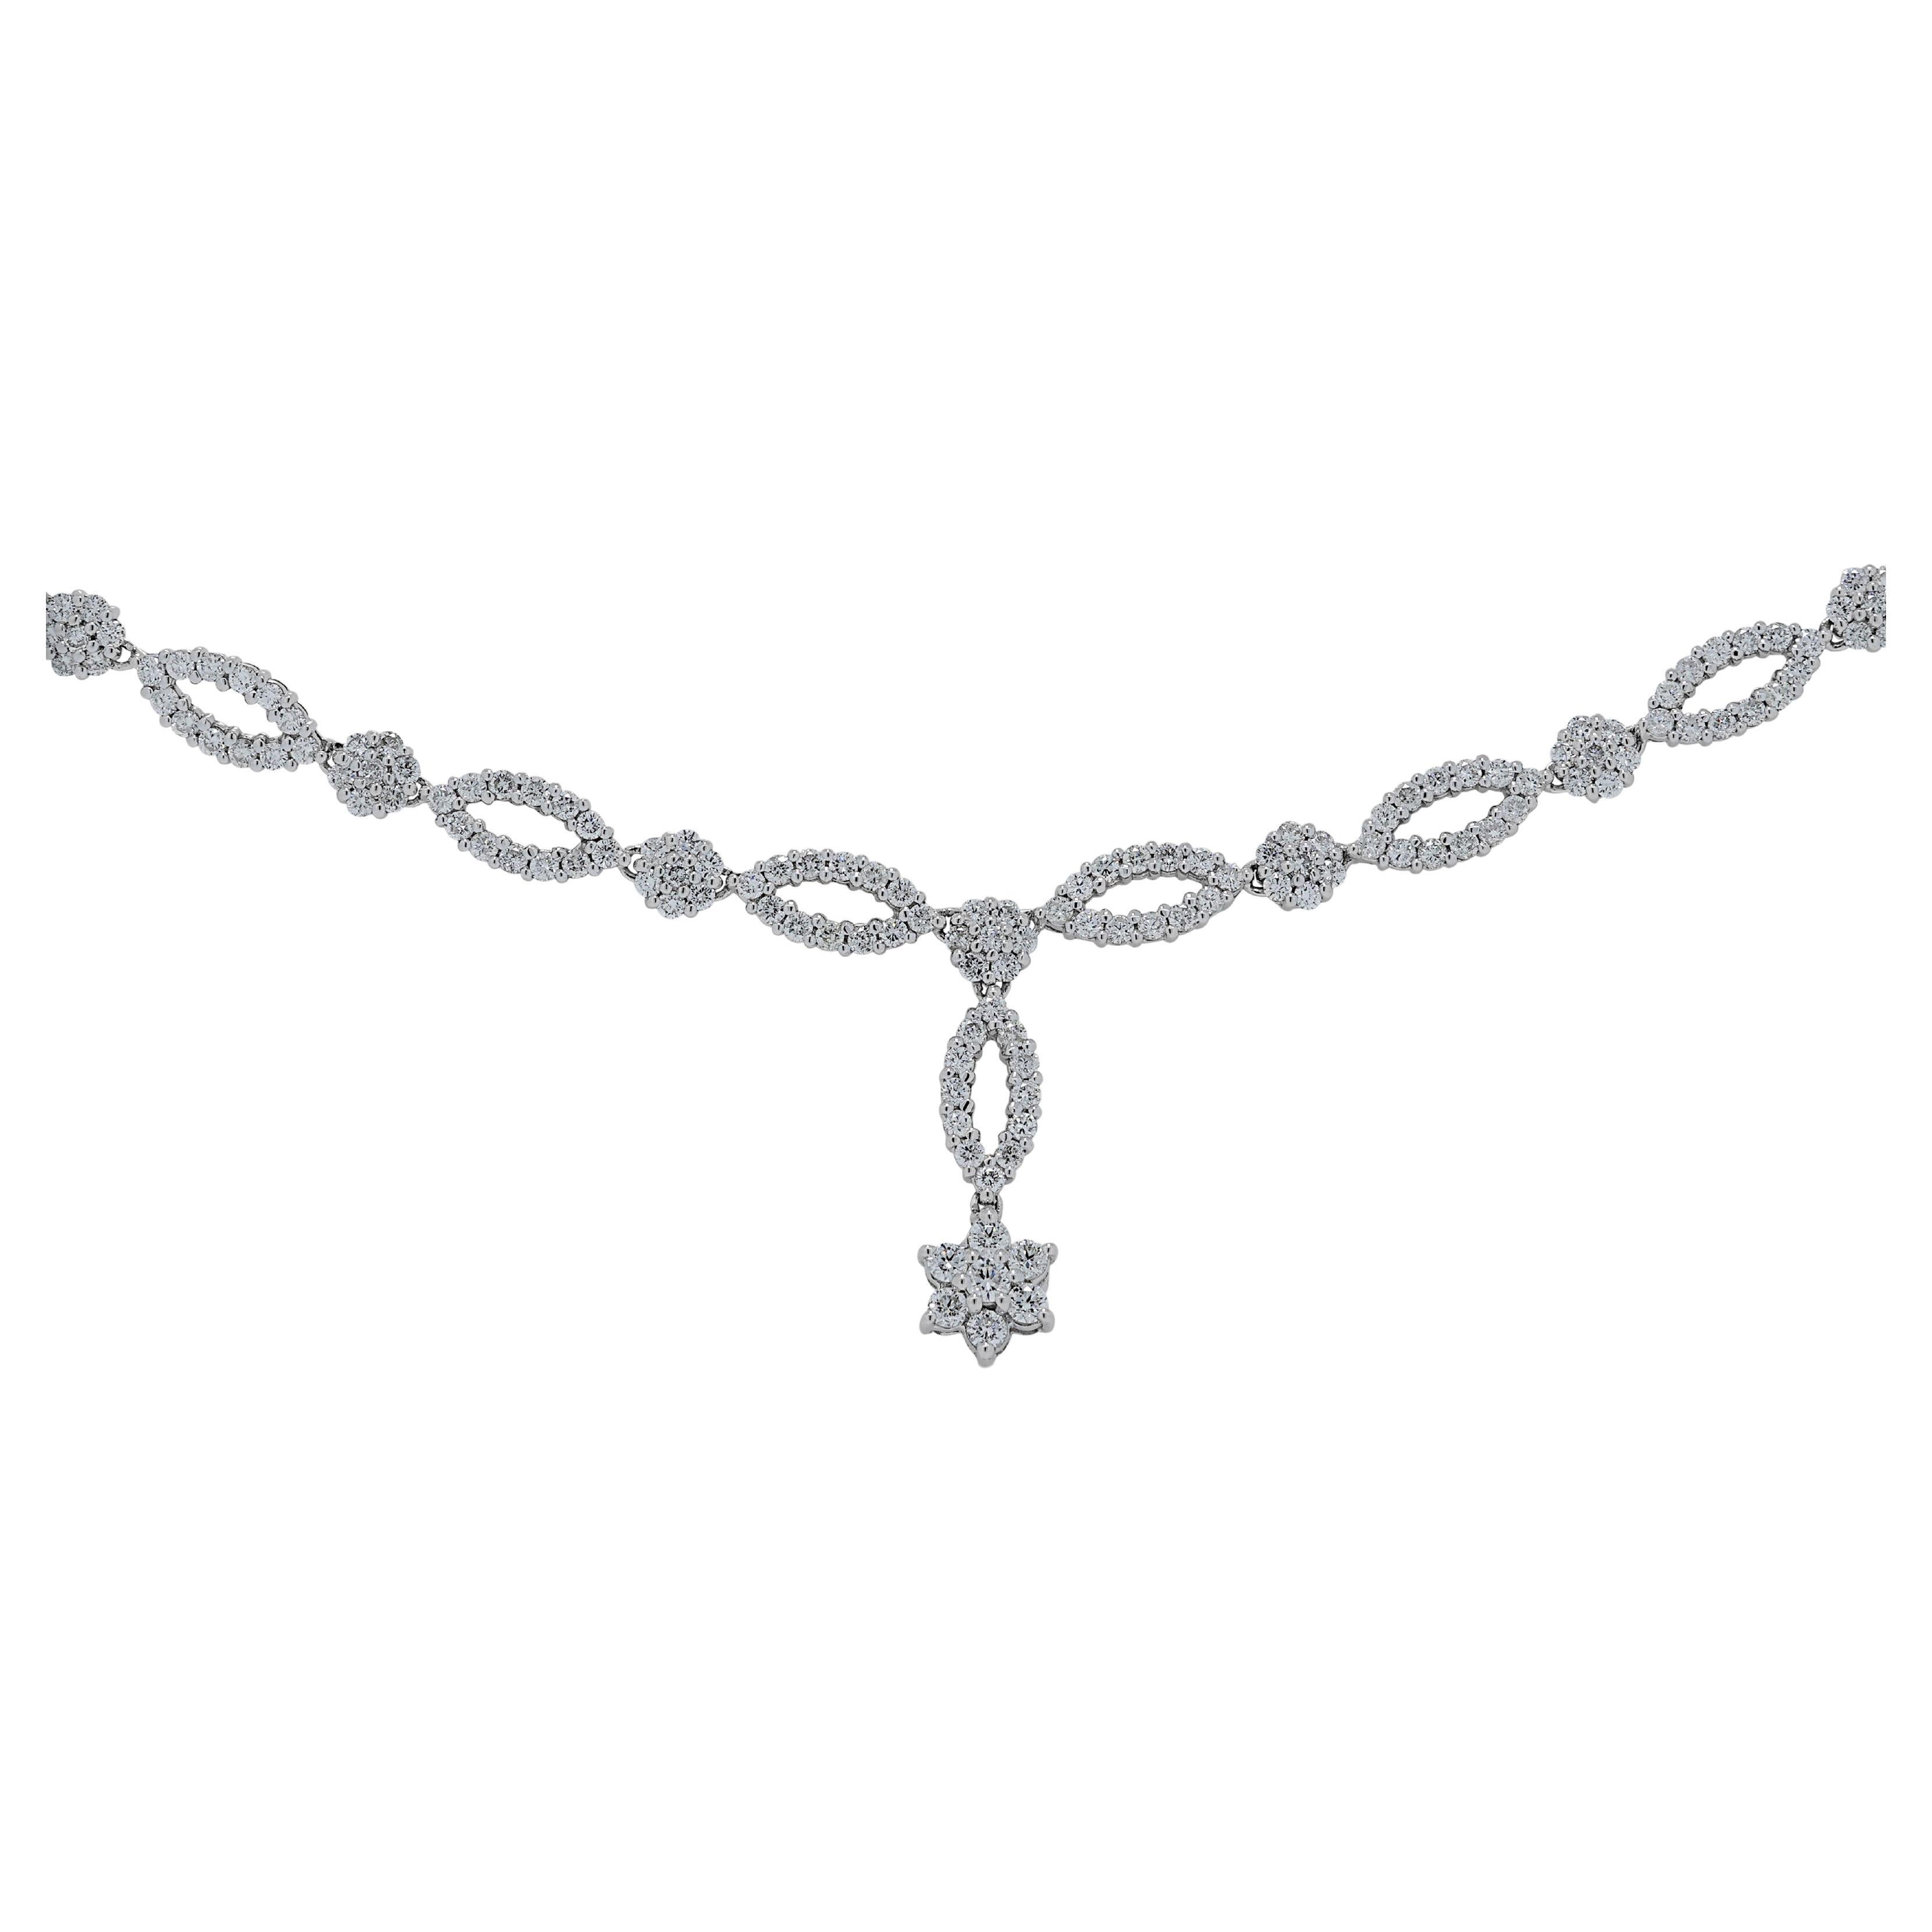 Fascinating 1.815ct Diamonds Necklace in 18K White Gold For Sale